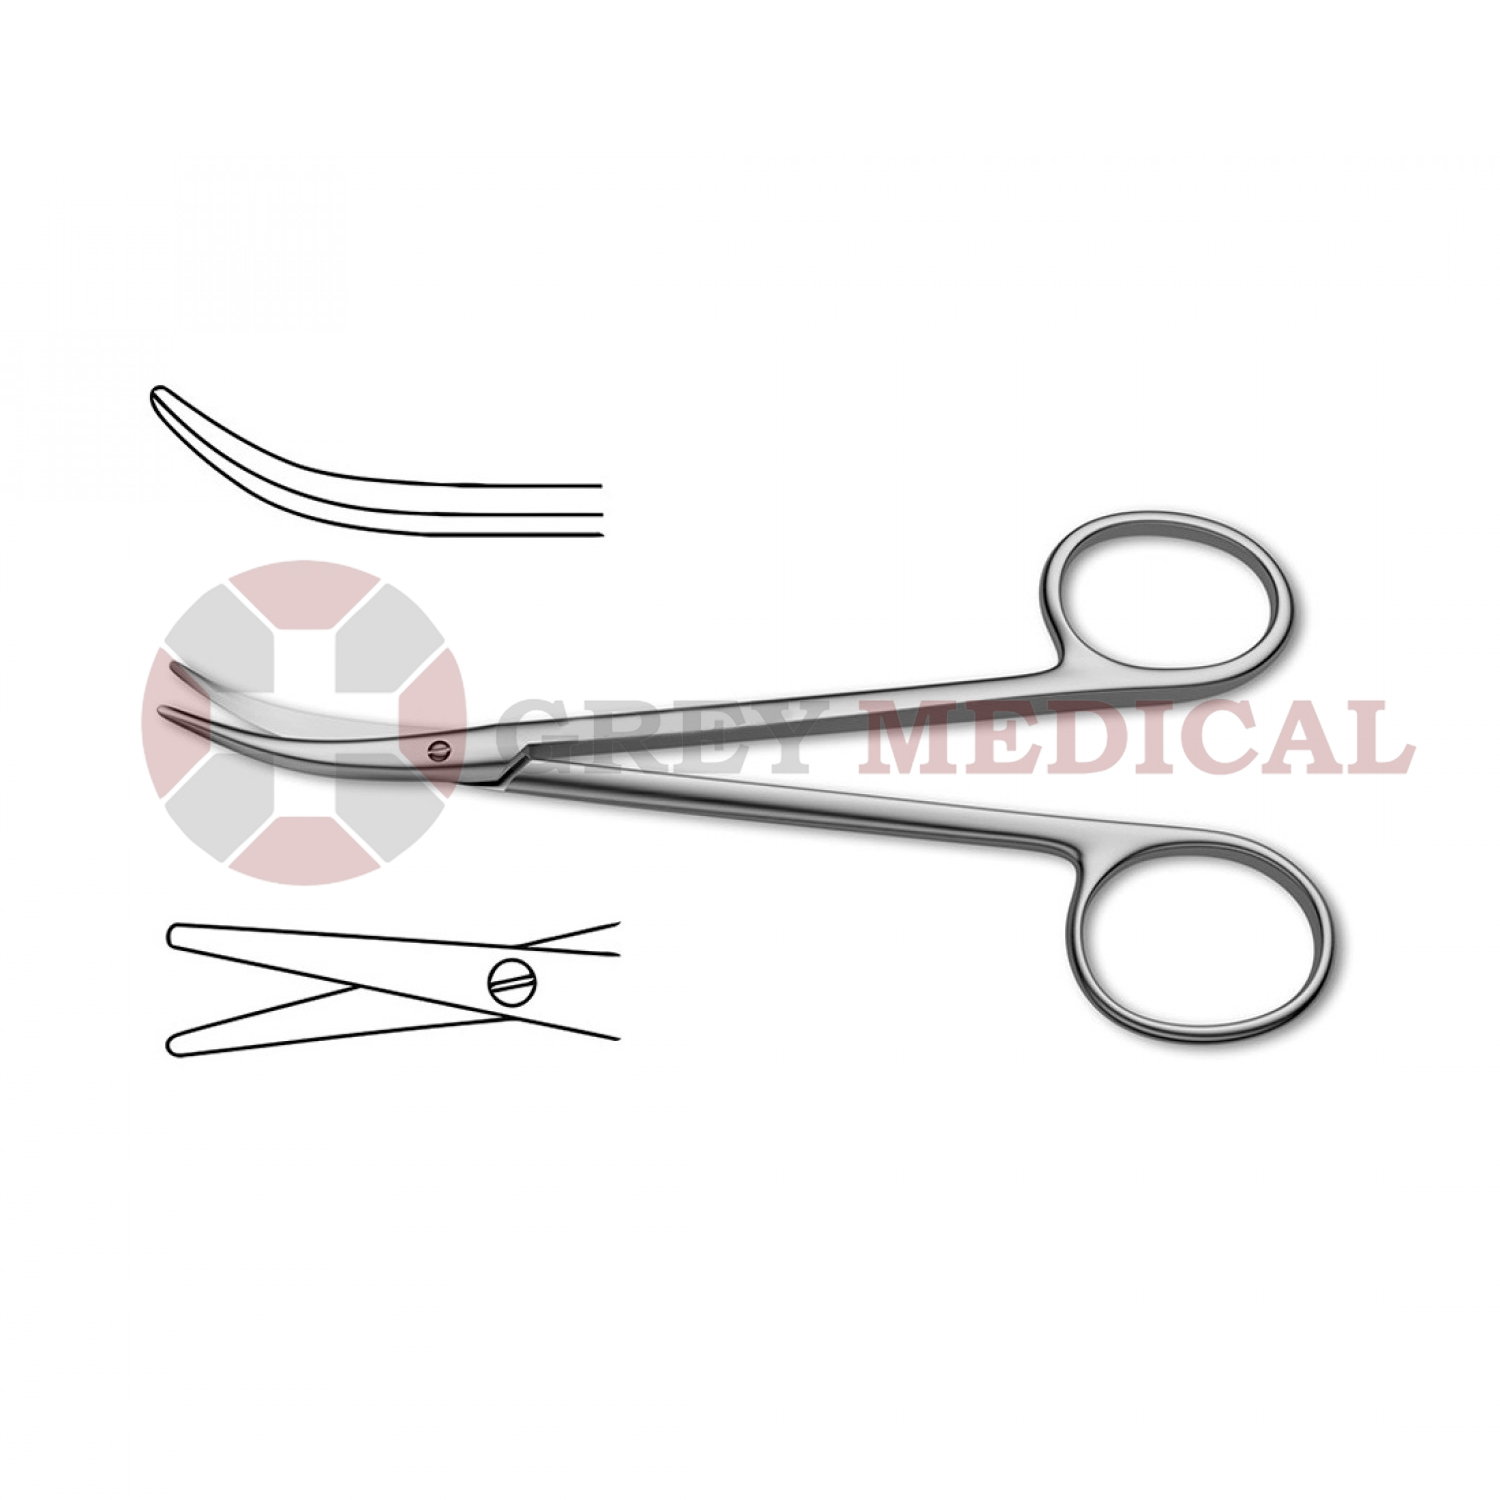 Cinelli Lower Lateral Scissors - Strong Curved Nasal Scissors